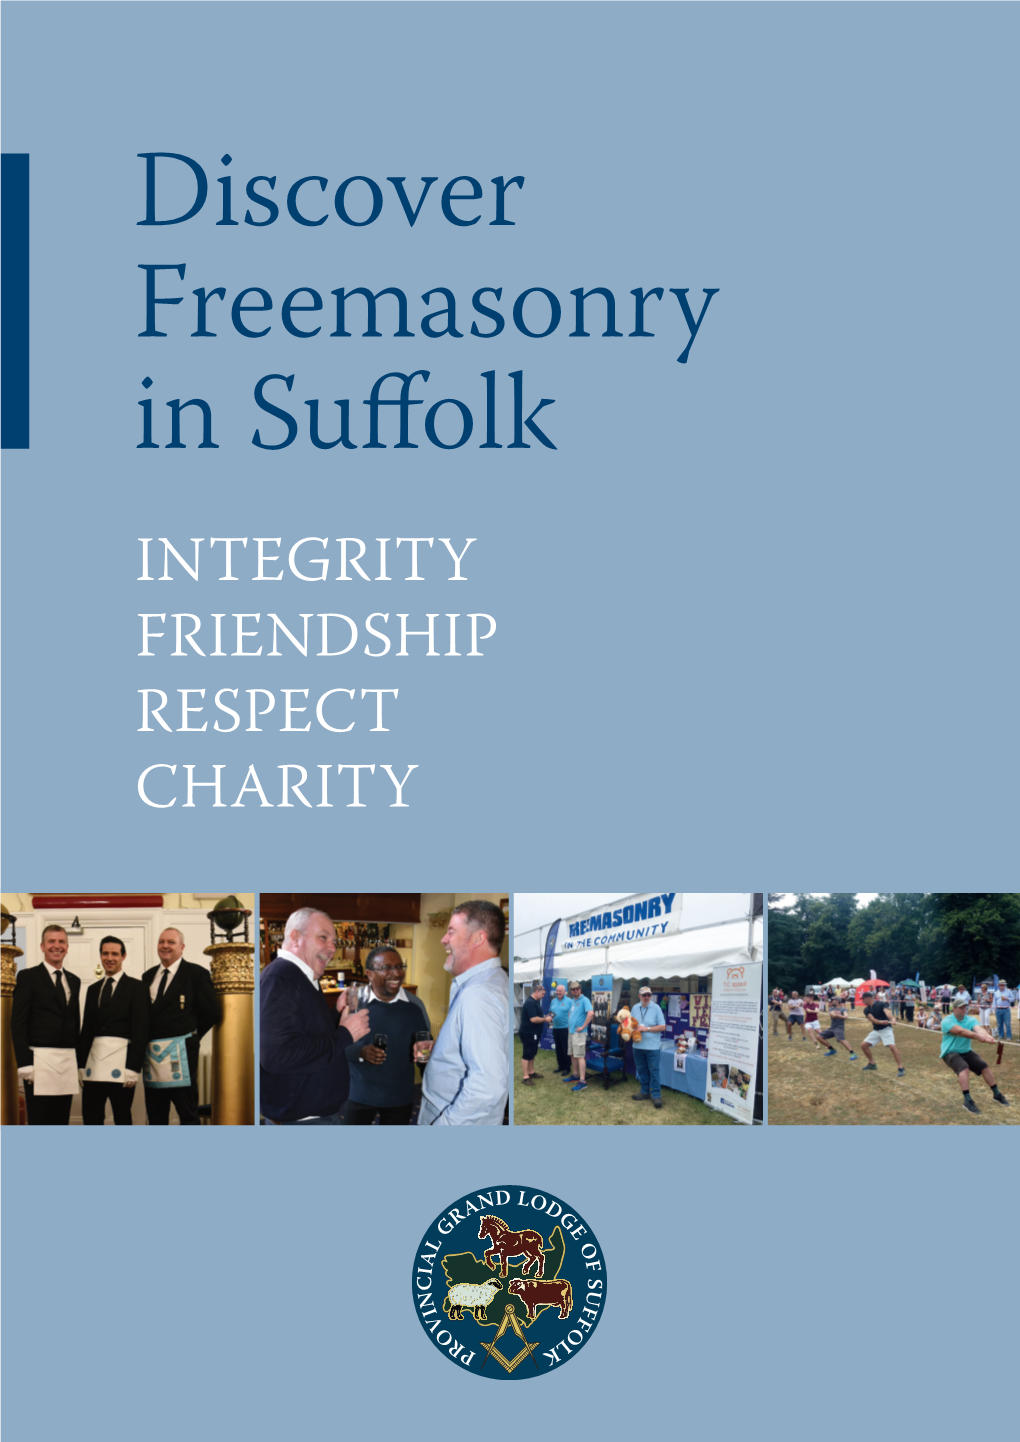 Discover Freemasonry in Suffolk INTEGRITY FRIENDSHIP RESPECT CHARITY What Are Your Guiding Principles?